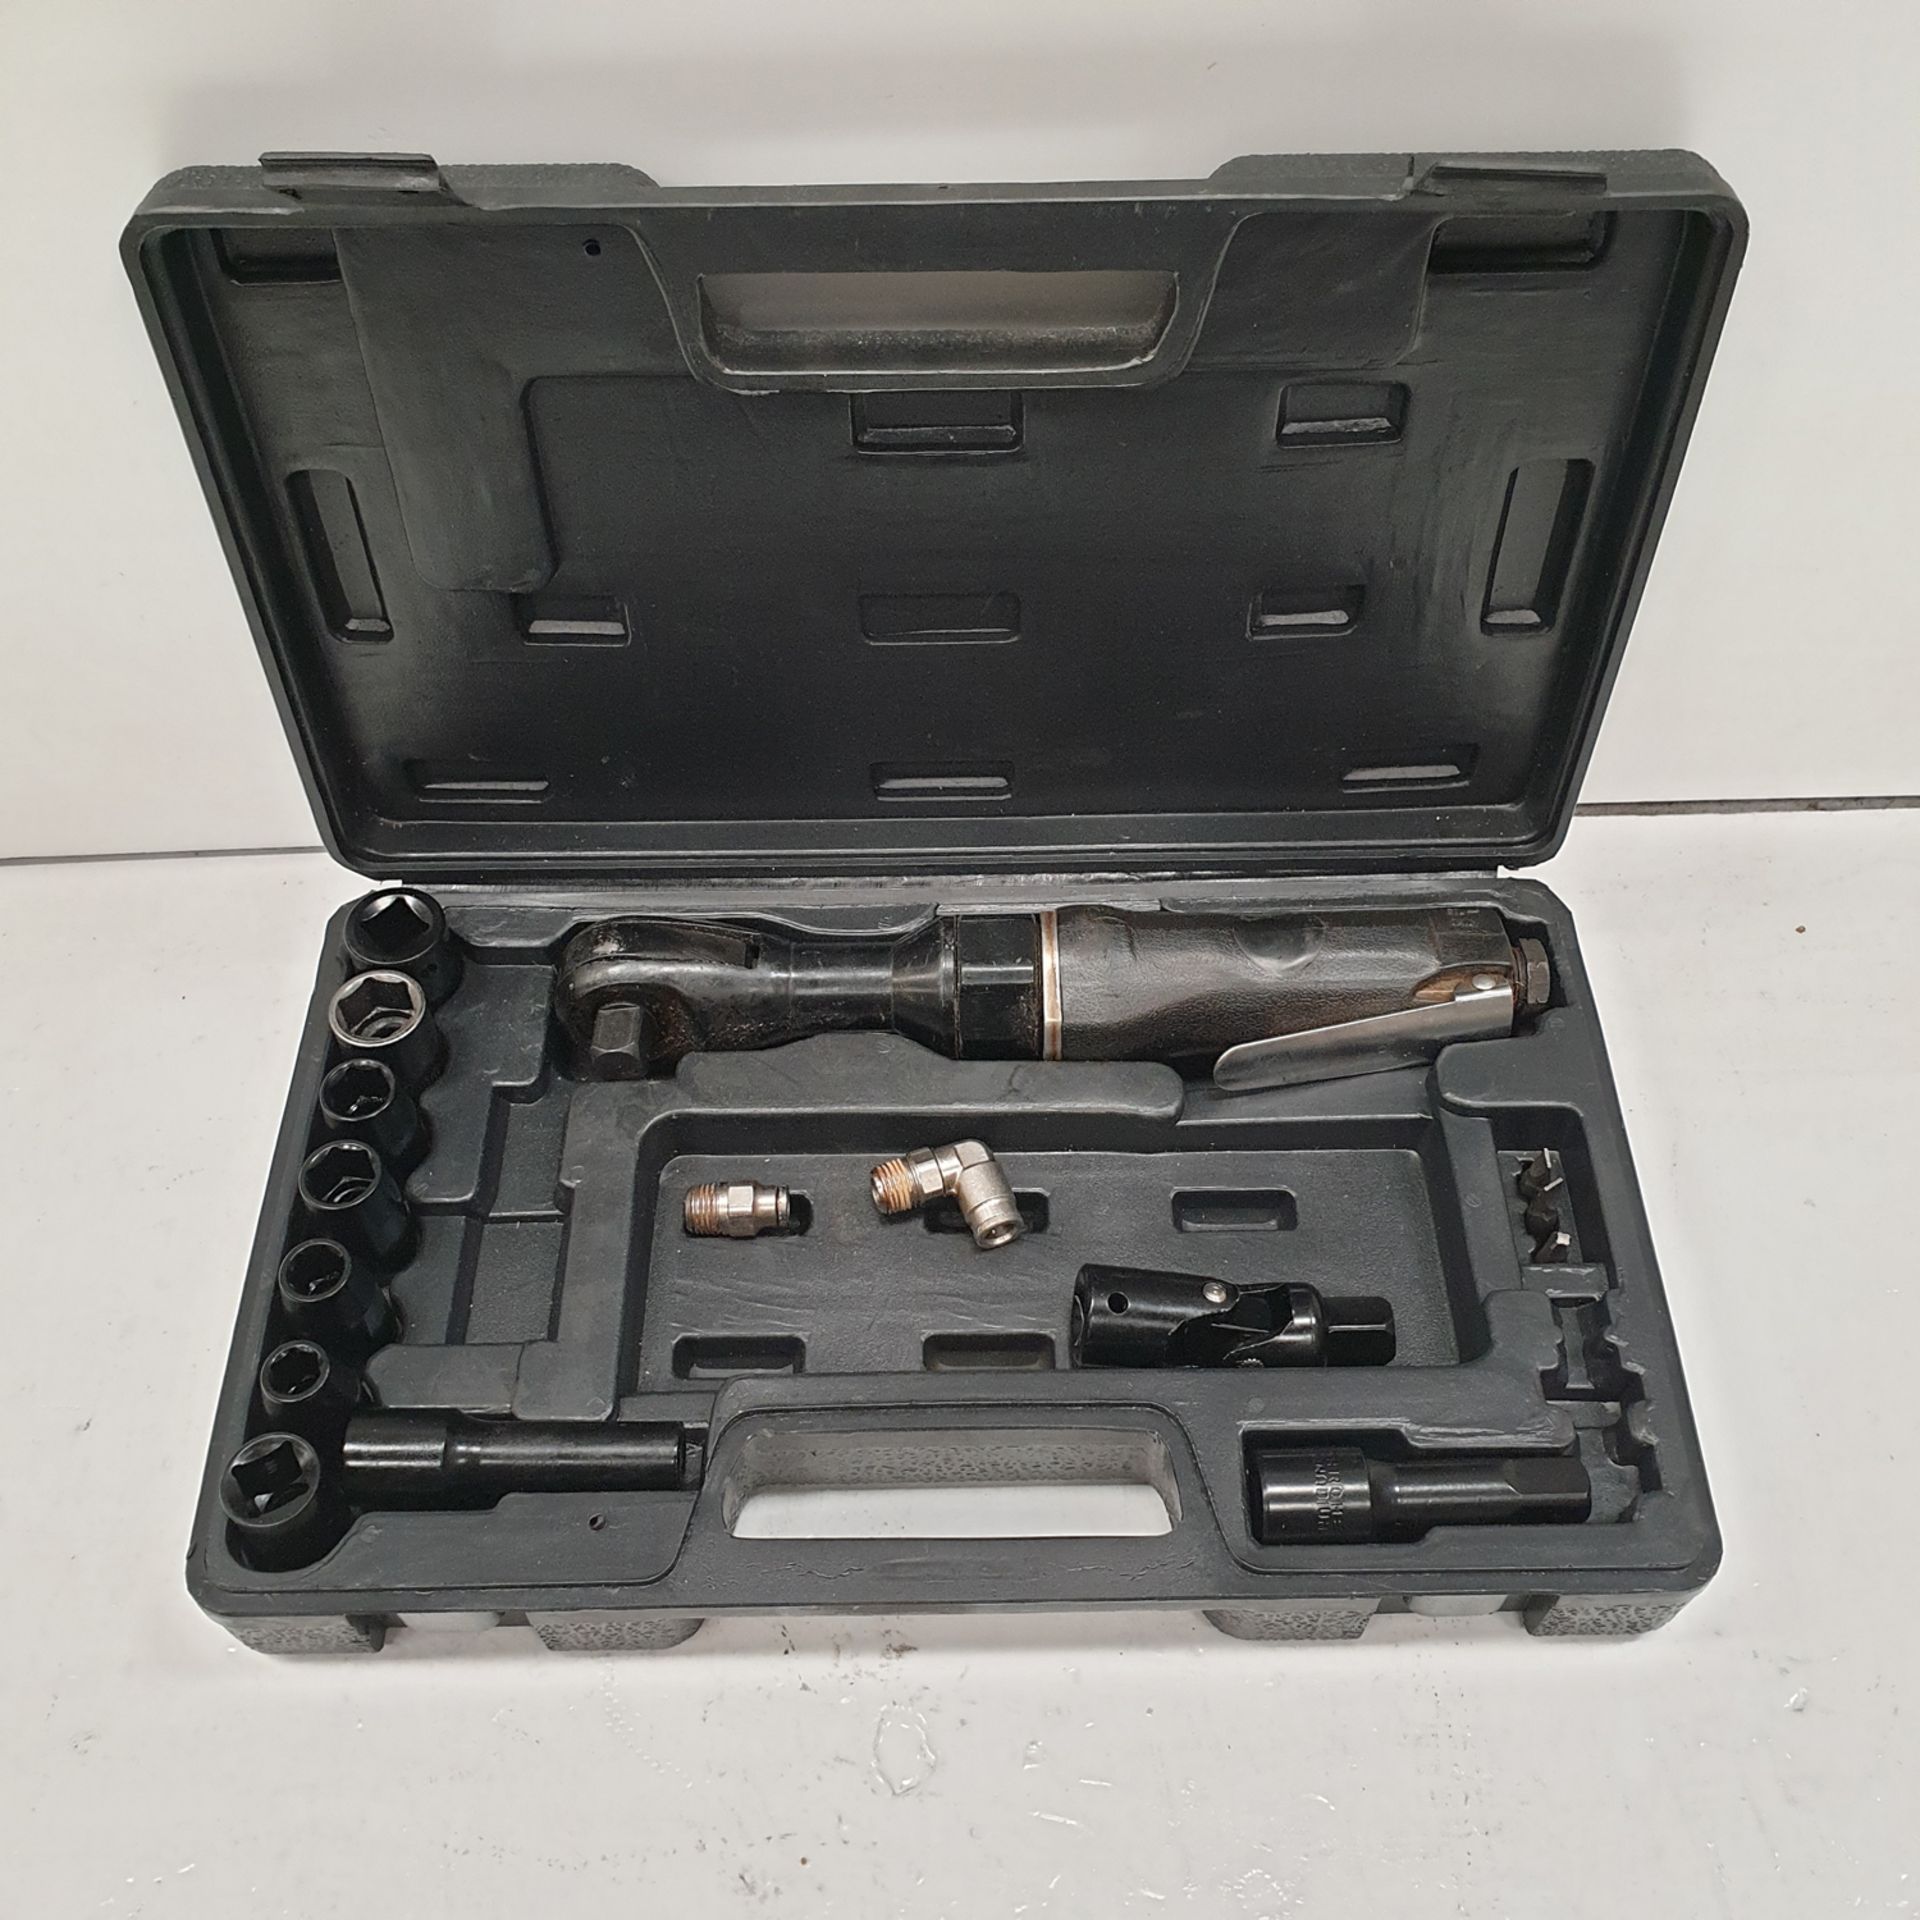 Pneumatic Wrench with Accessories.